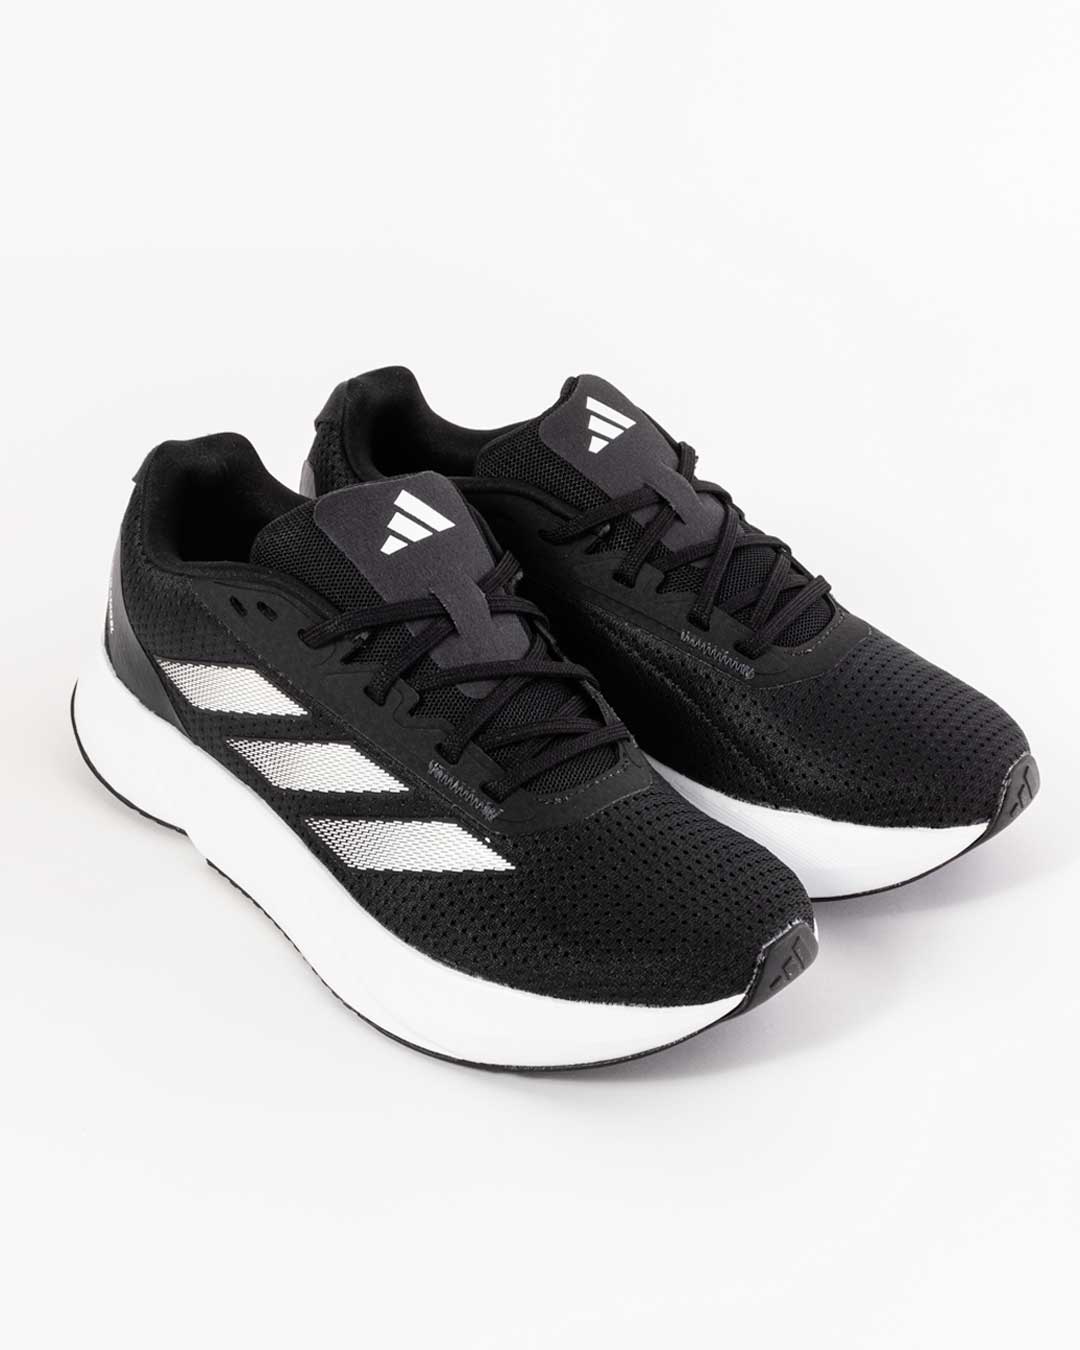 aide angled shot of men's adidas trainers in black with three white stripes across upper ,midsole in white and adidas logo on tongue in white. Adidas three stripe logo embossed on toe cap